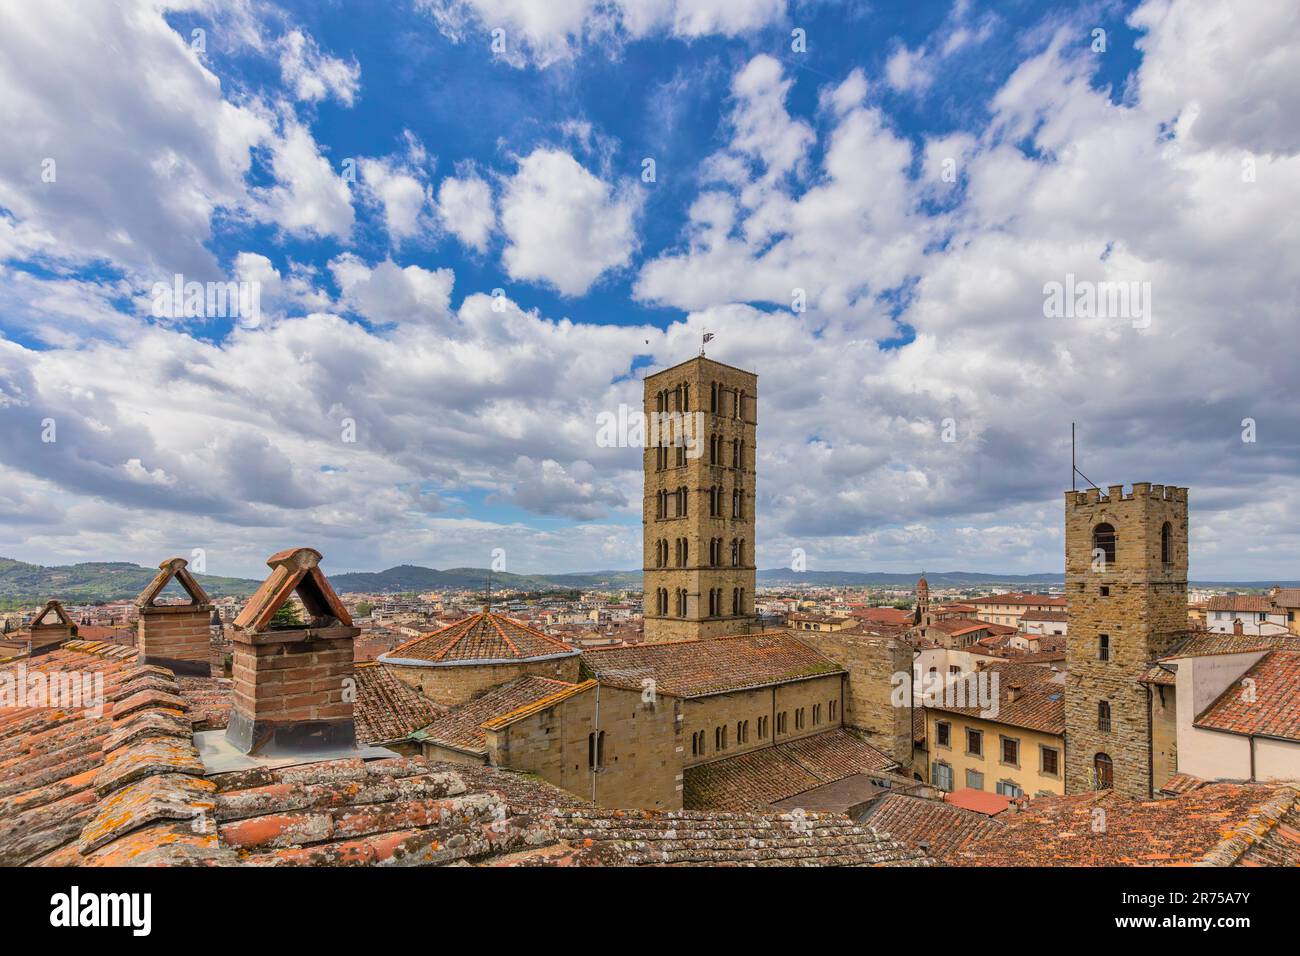 Italy, Tuscany, Arezzo, elevated view on the Arezzo roofs and the tower of Santa Maria della Pieve Stock Photo